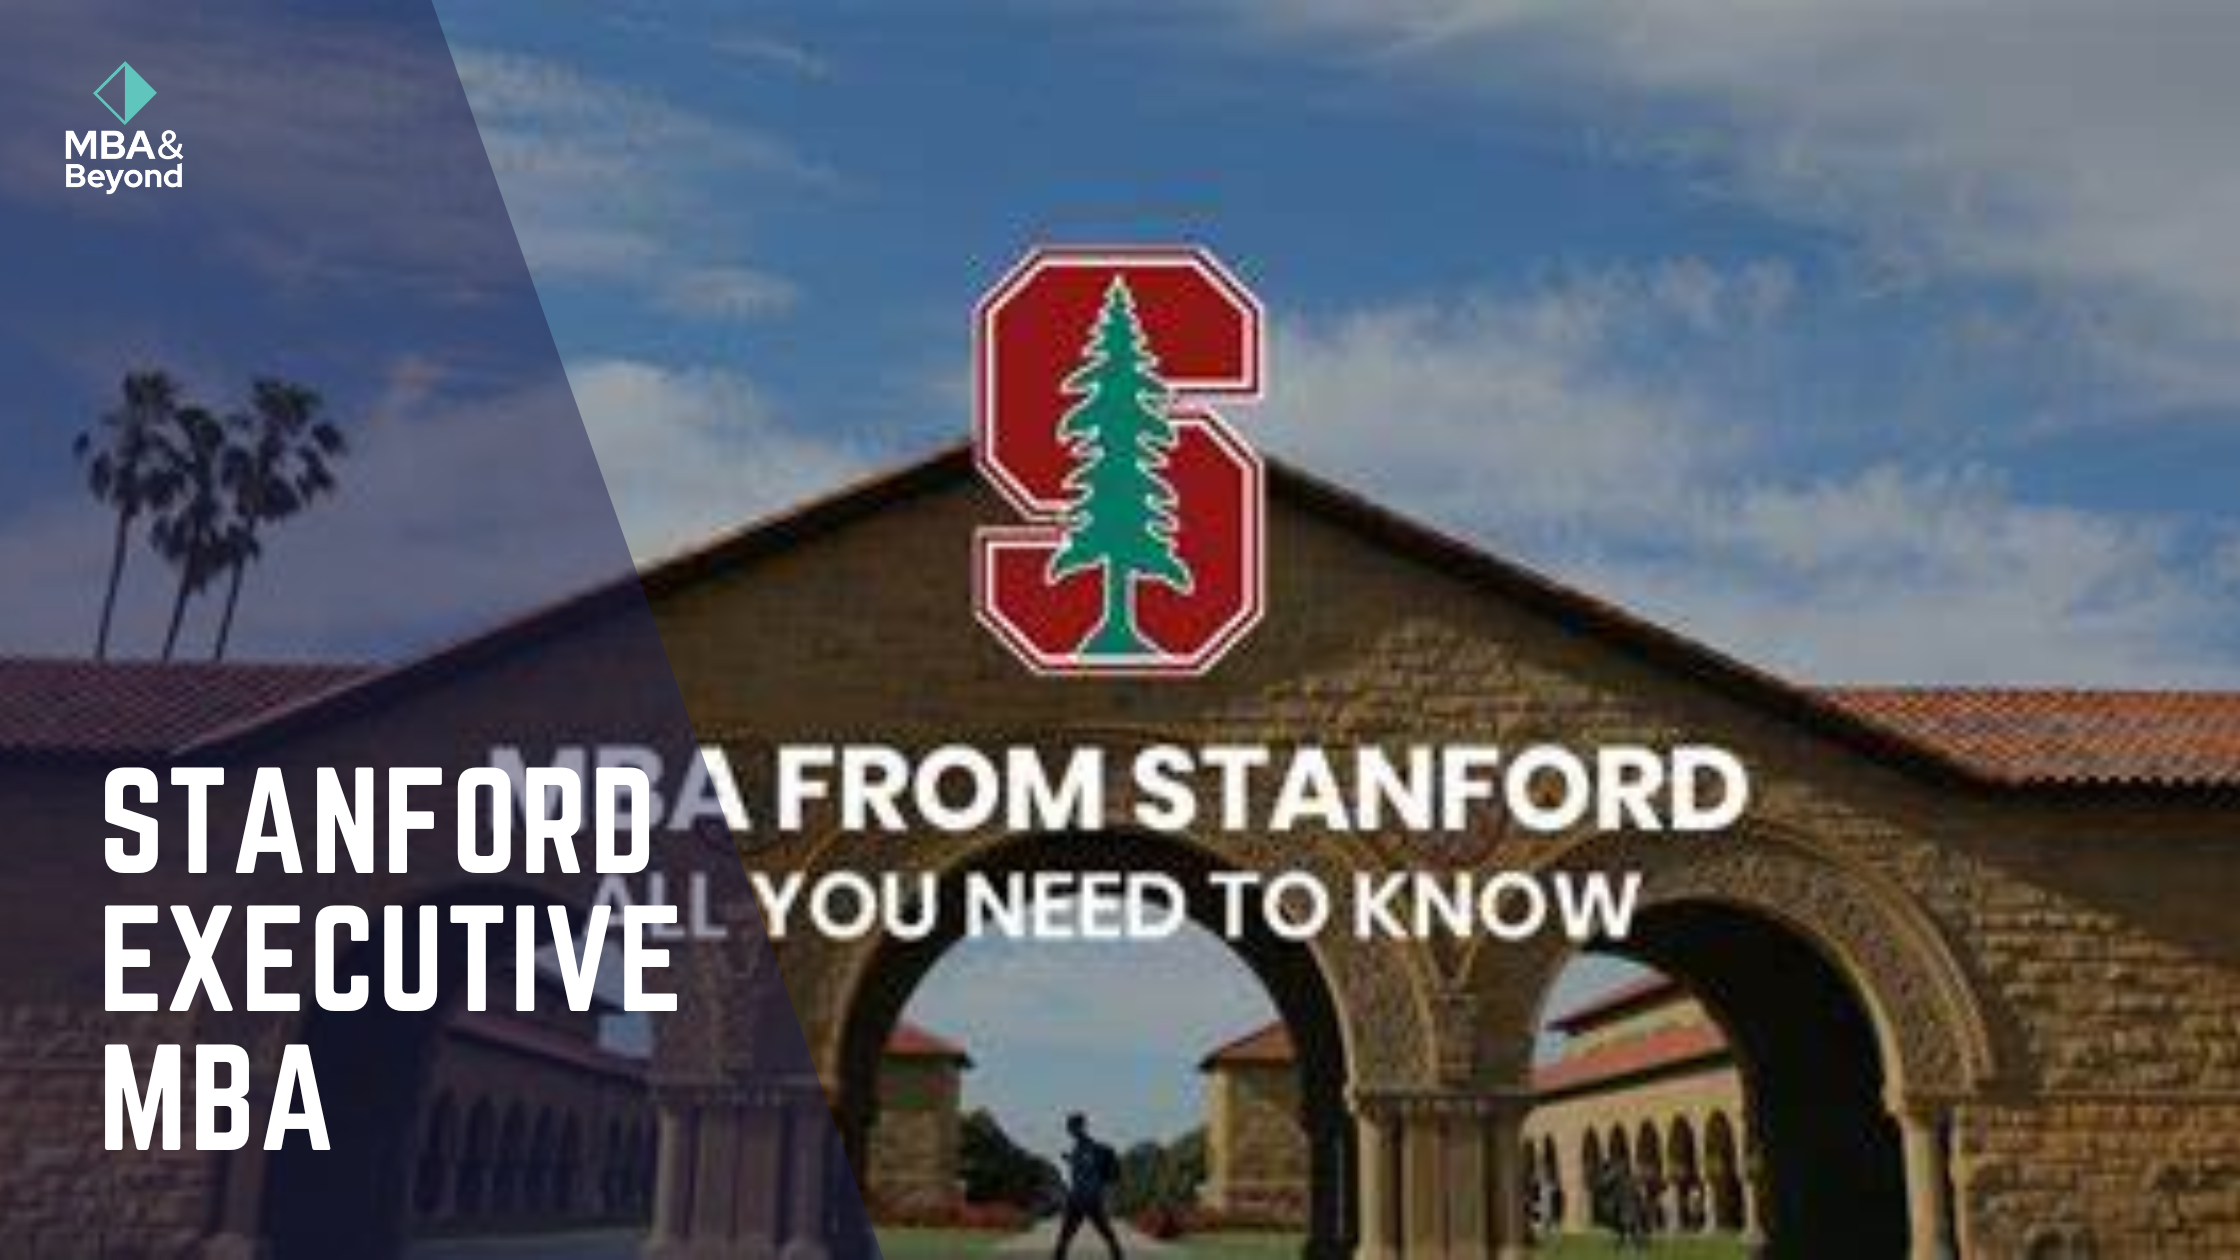 Stanford Executive MBA